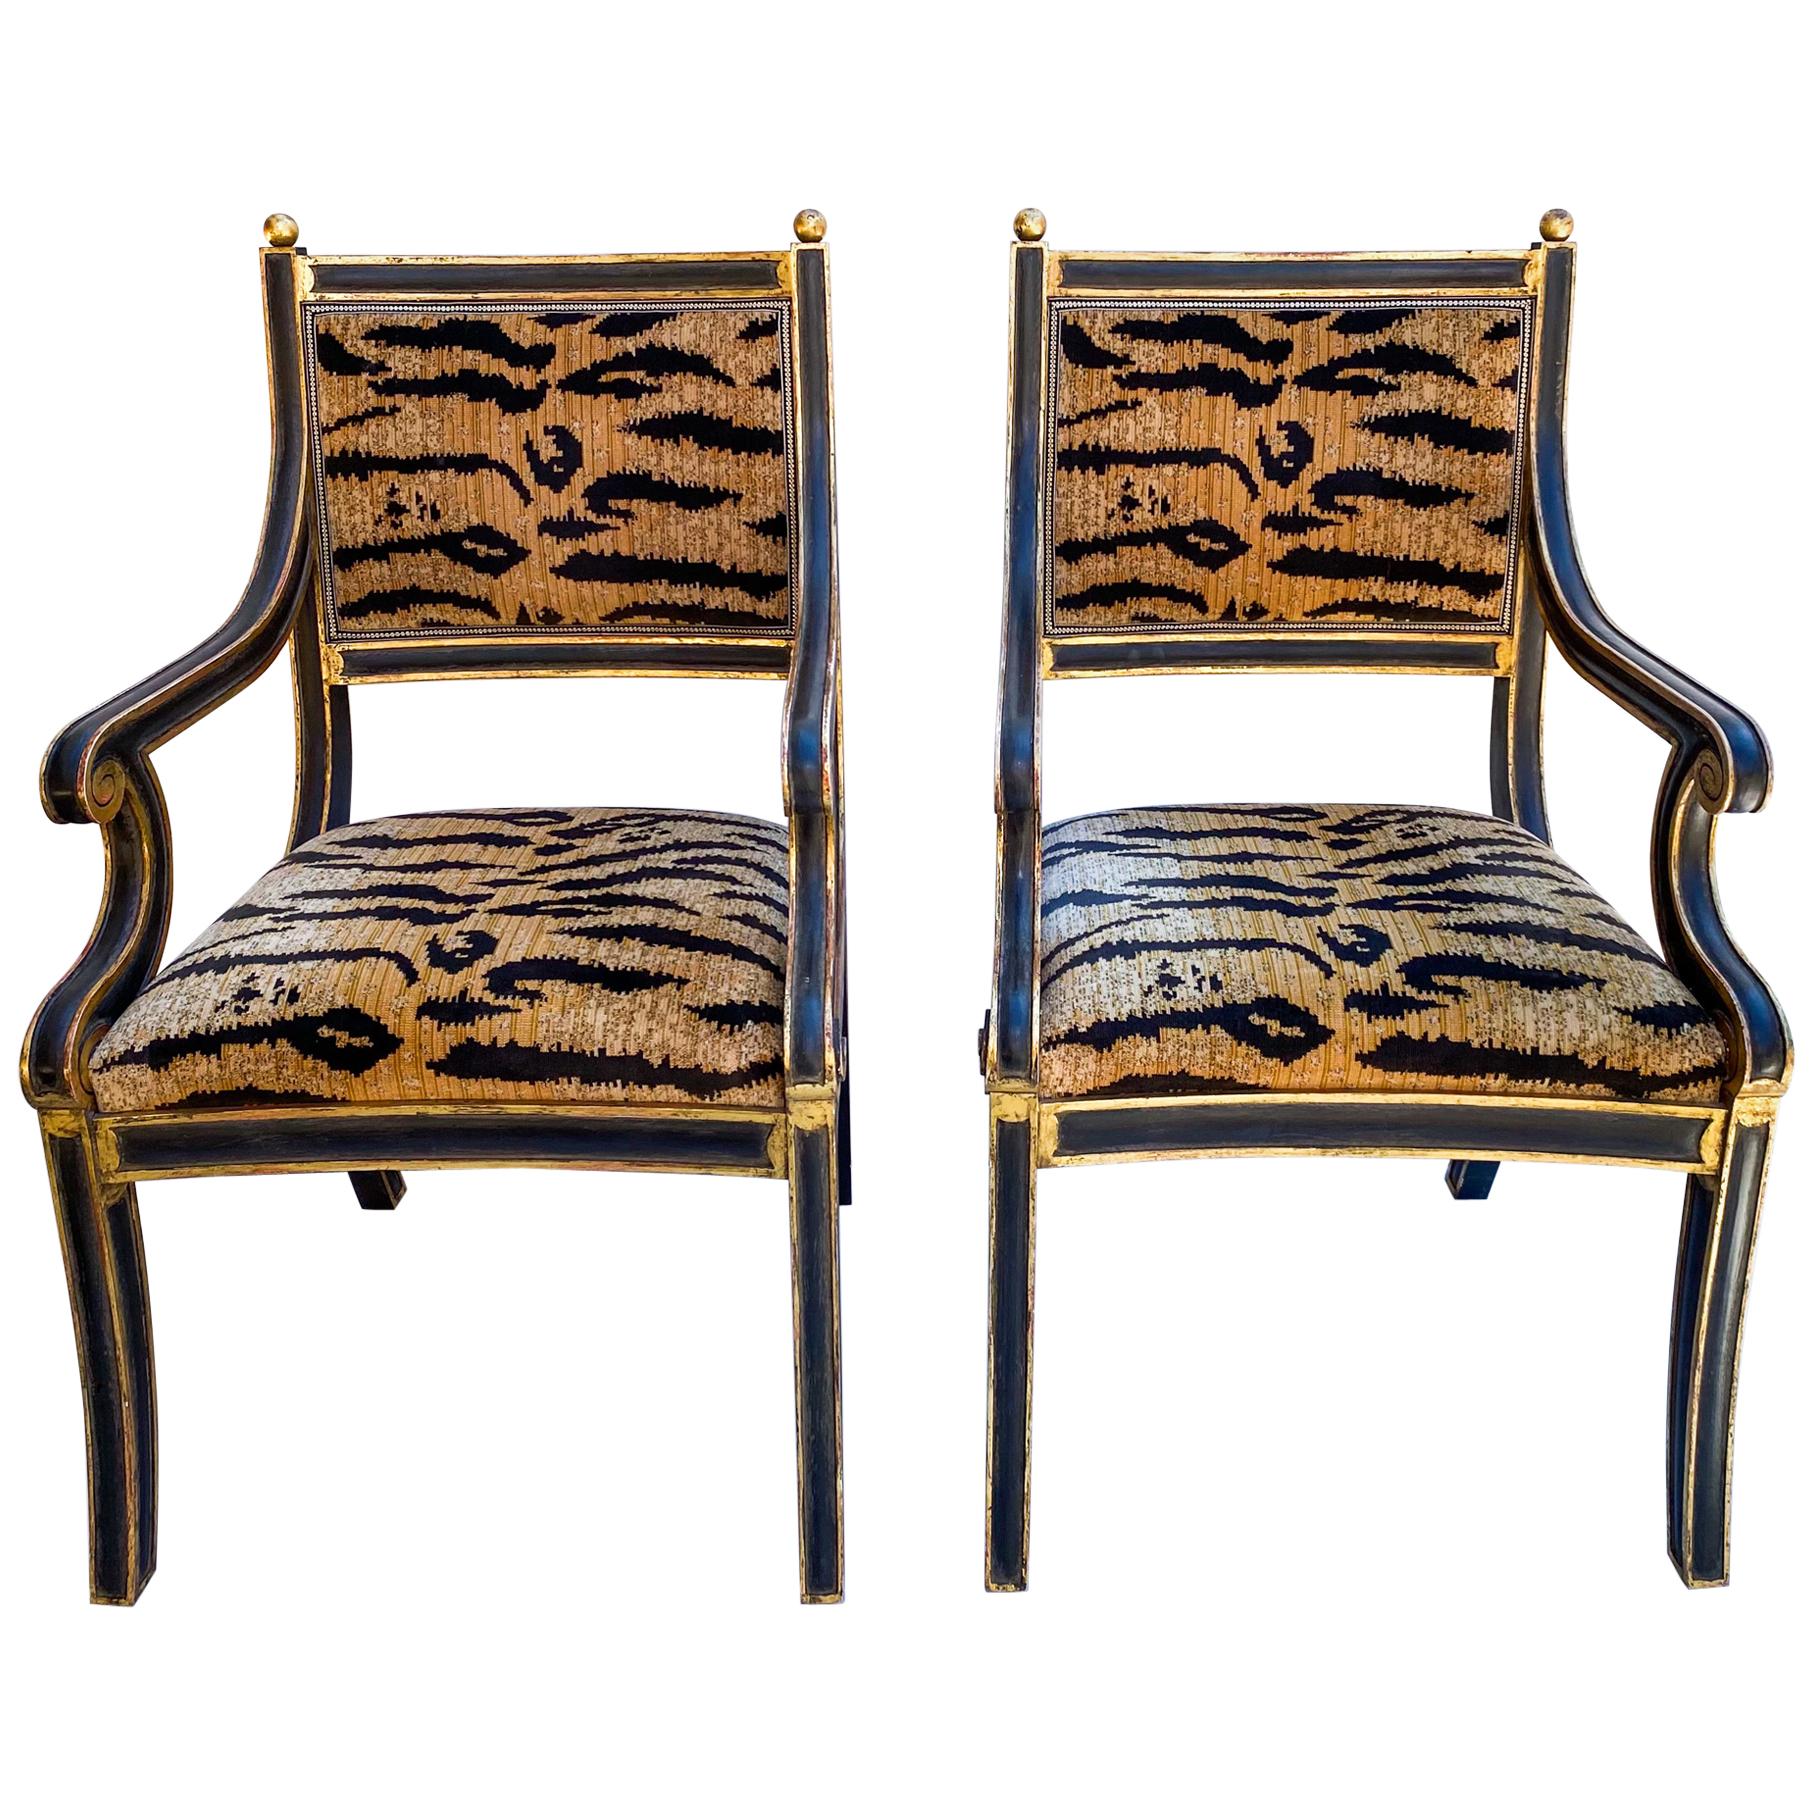 Pair of Neo-Classical Style Bergère Chairs by Jerry Pair for Formations 